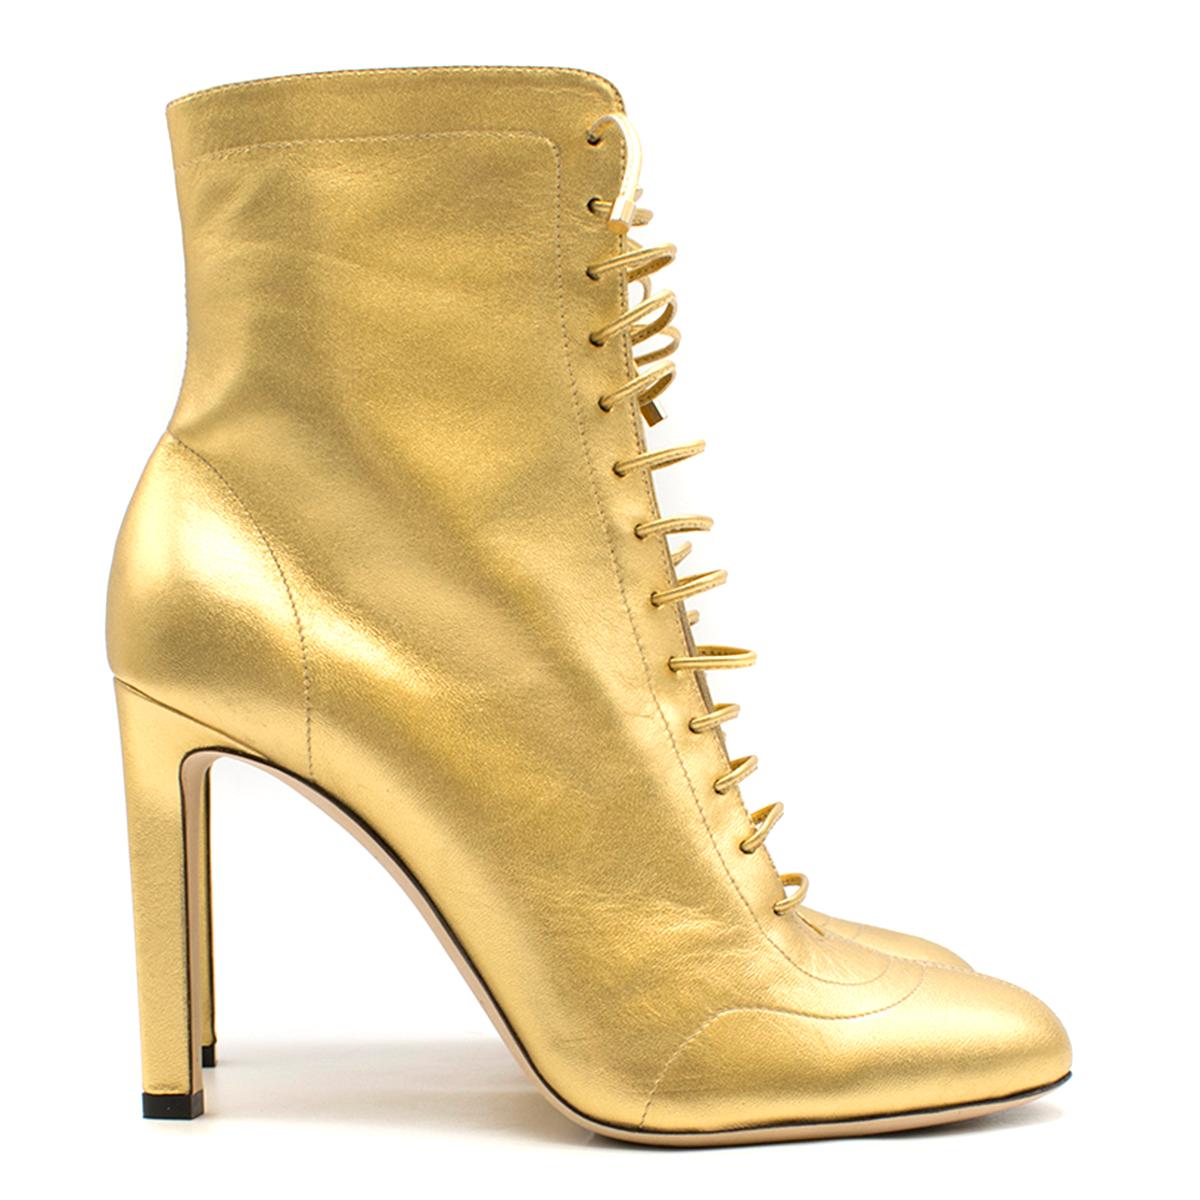 Jimmy Choo Gold Daize Metallic Leather Ankle Boots.

- Leather heeled ankle boots
- Lace-up fastening
- Side zip fastening
- Round toe
- Heel
- Laced front
- Leather upper
- Leather lining
- Leather and synthetic sole
- Made in Italy

Please note,